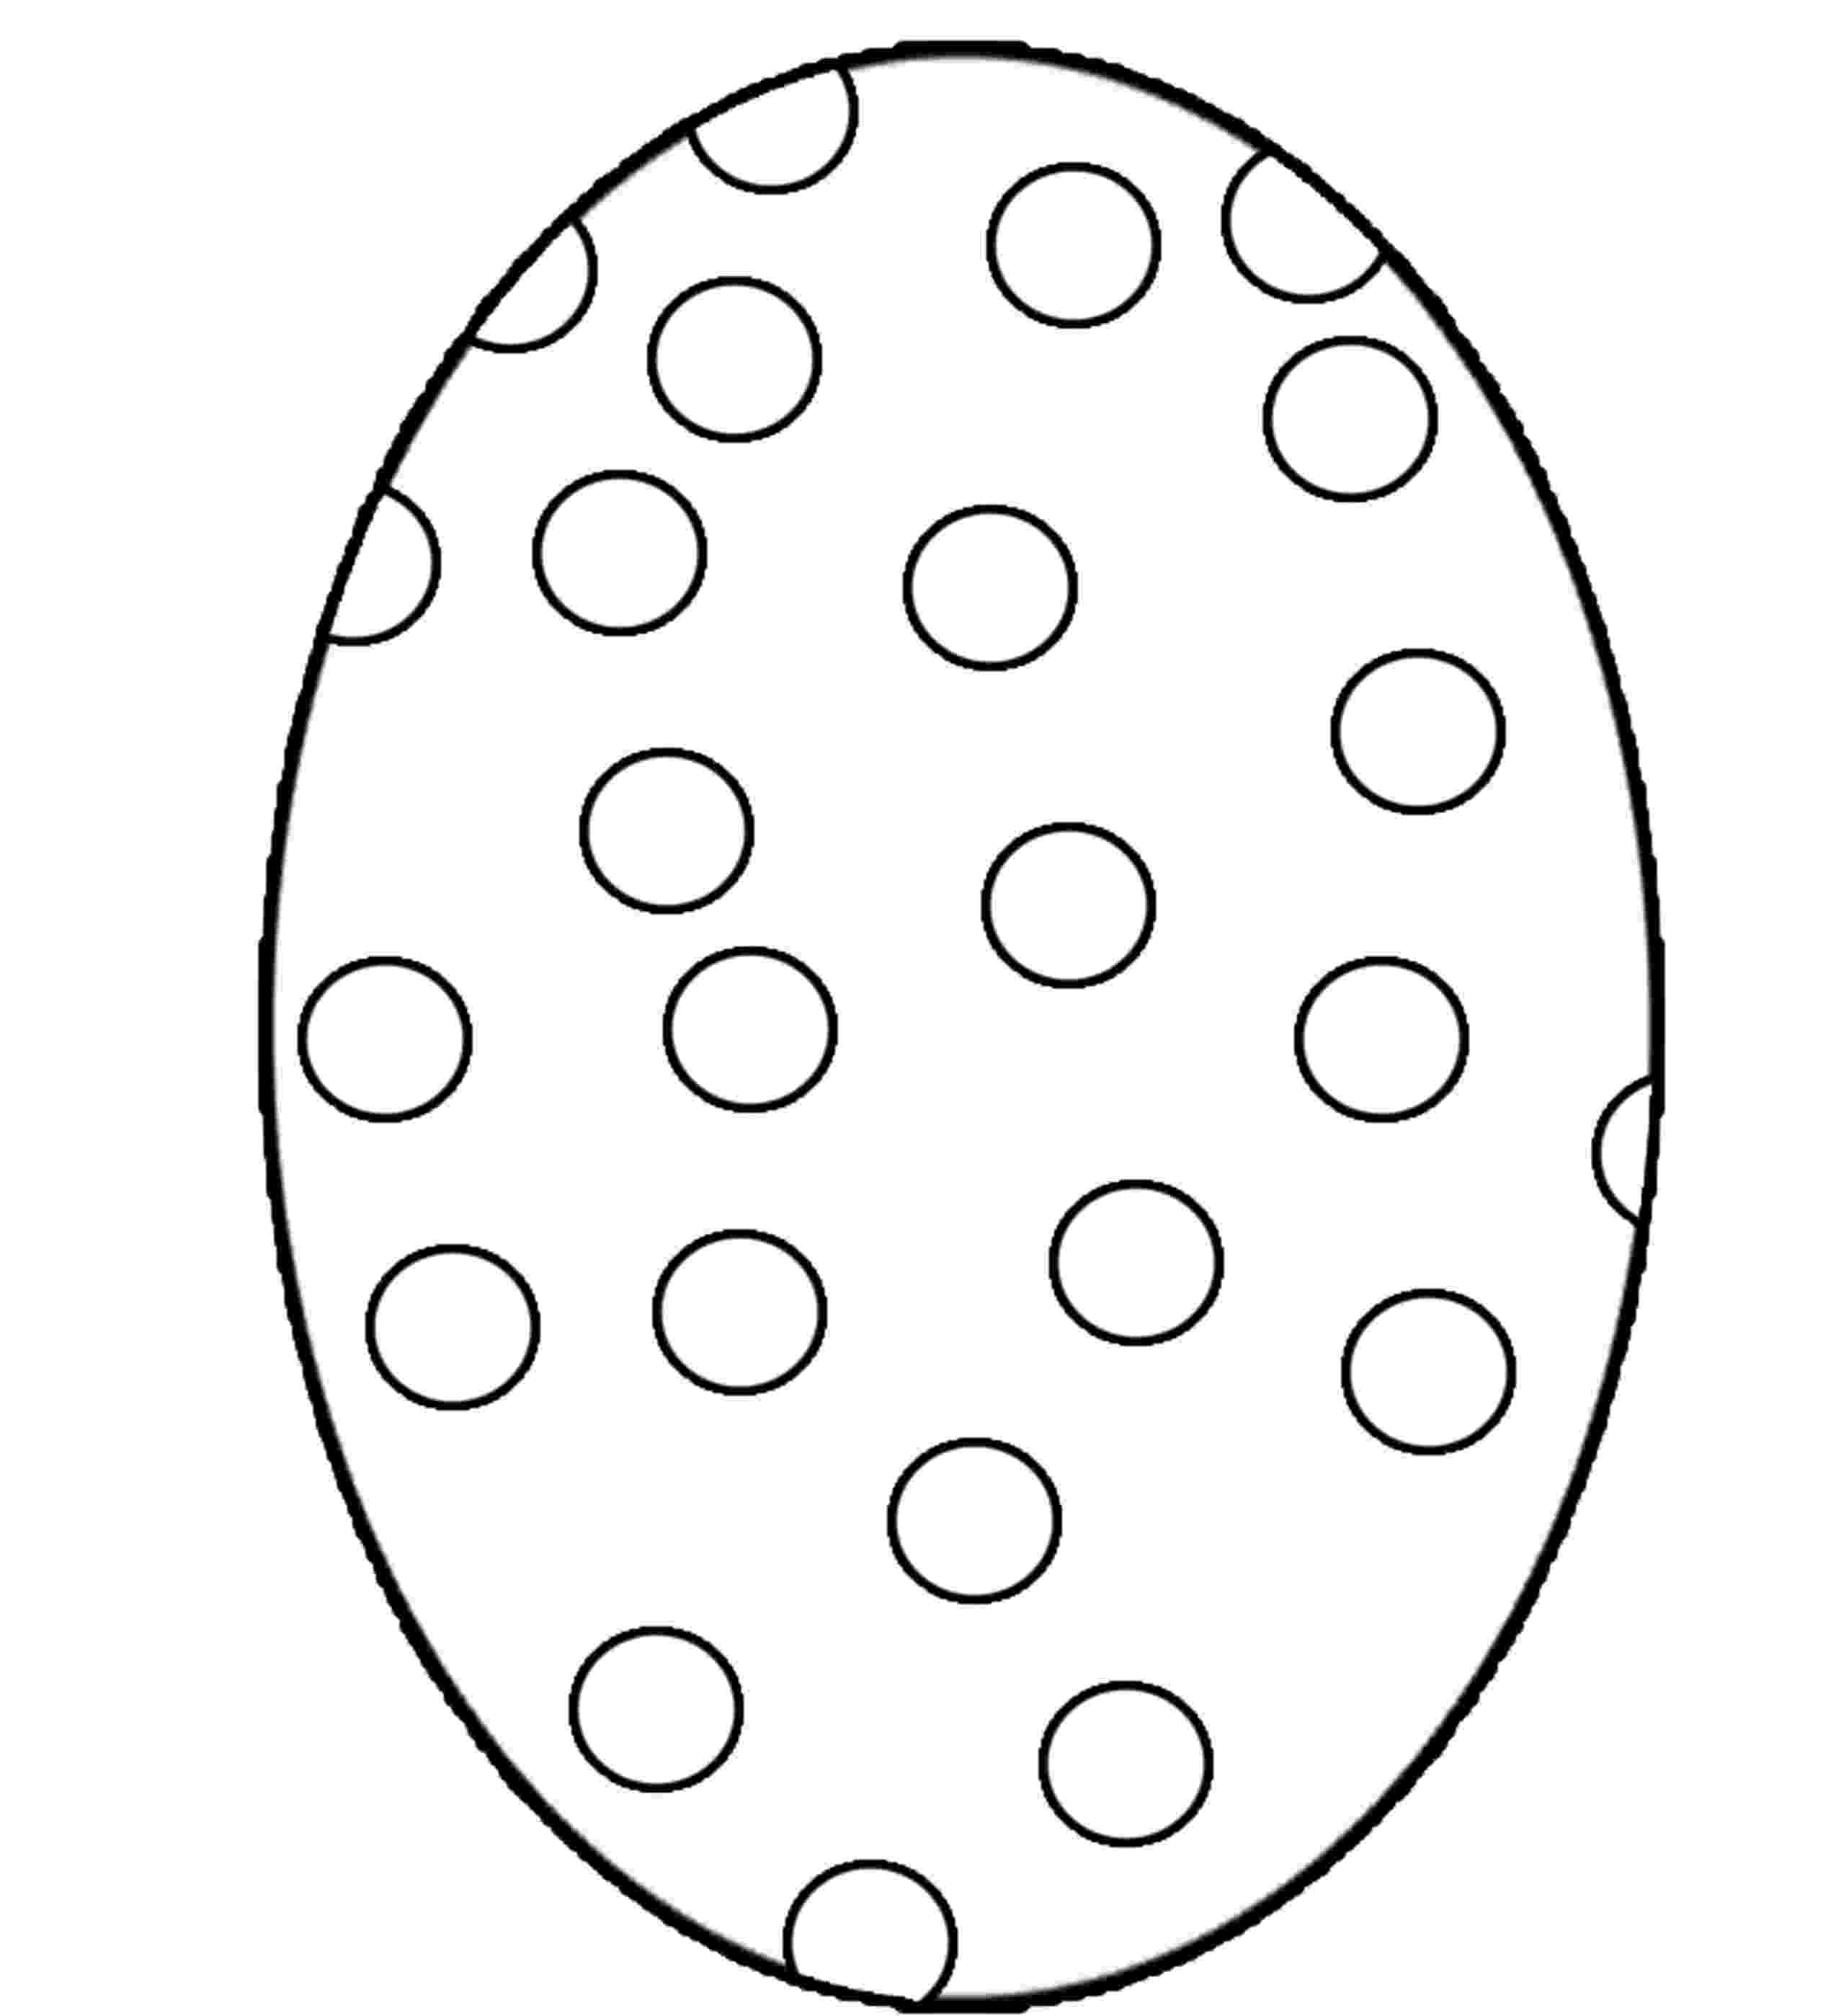 egg coloring sheet easter egg coloring pages twopartswhimsicalonepartpeculiar egg sheet coloring 